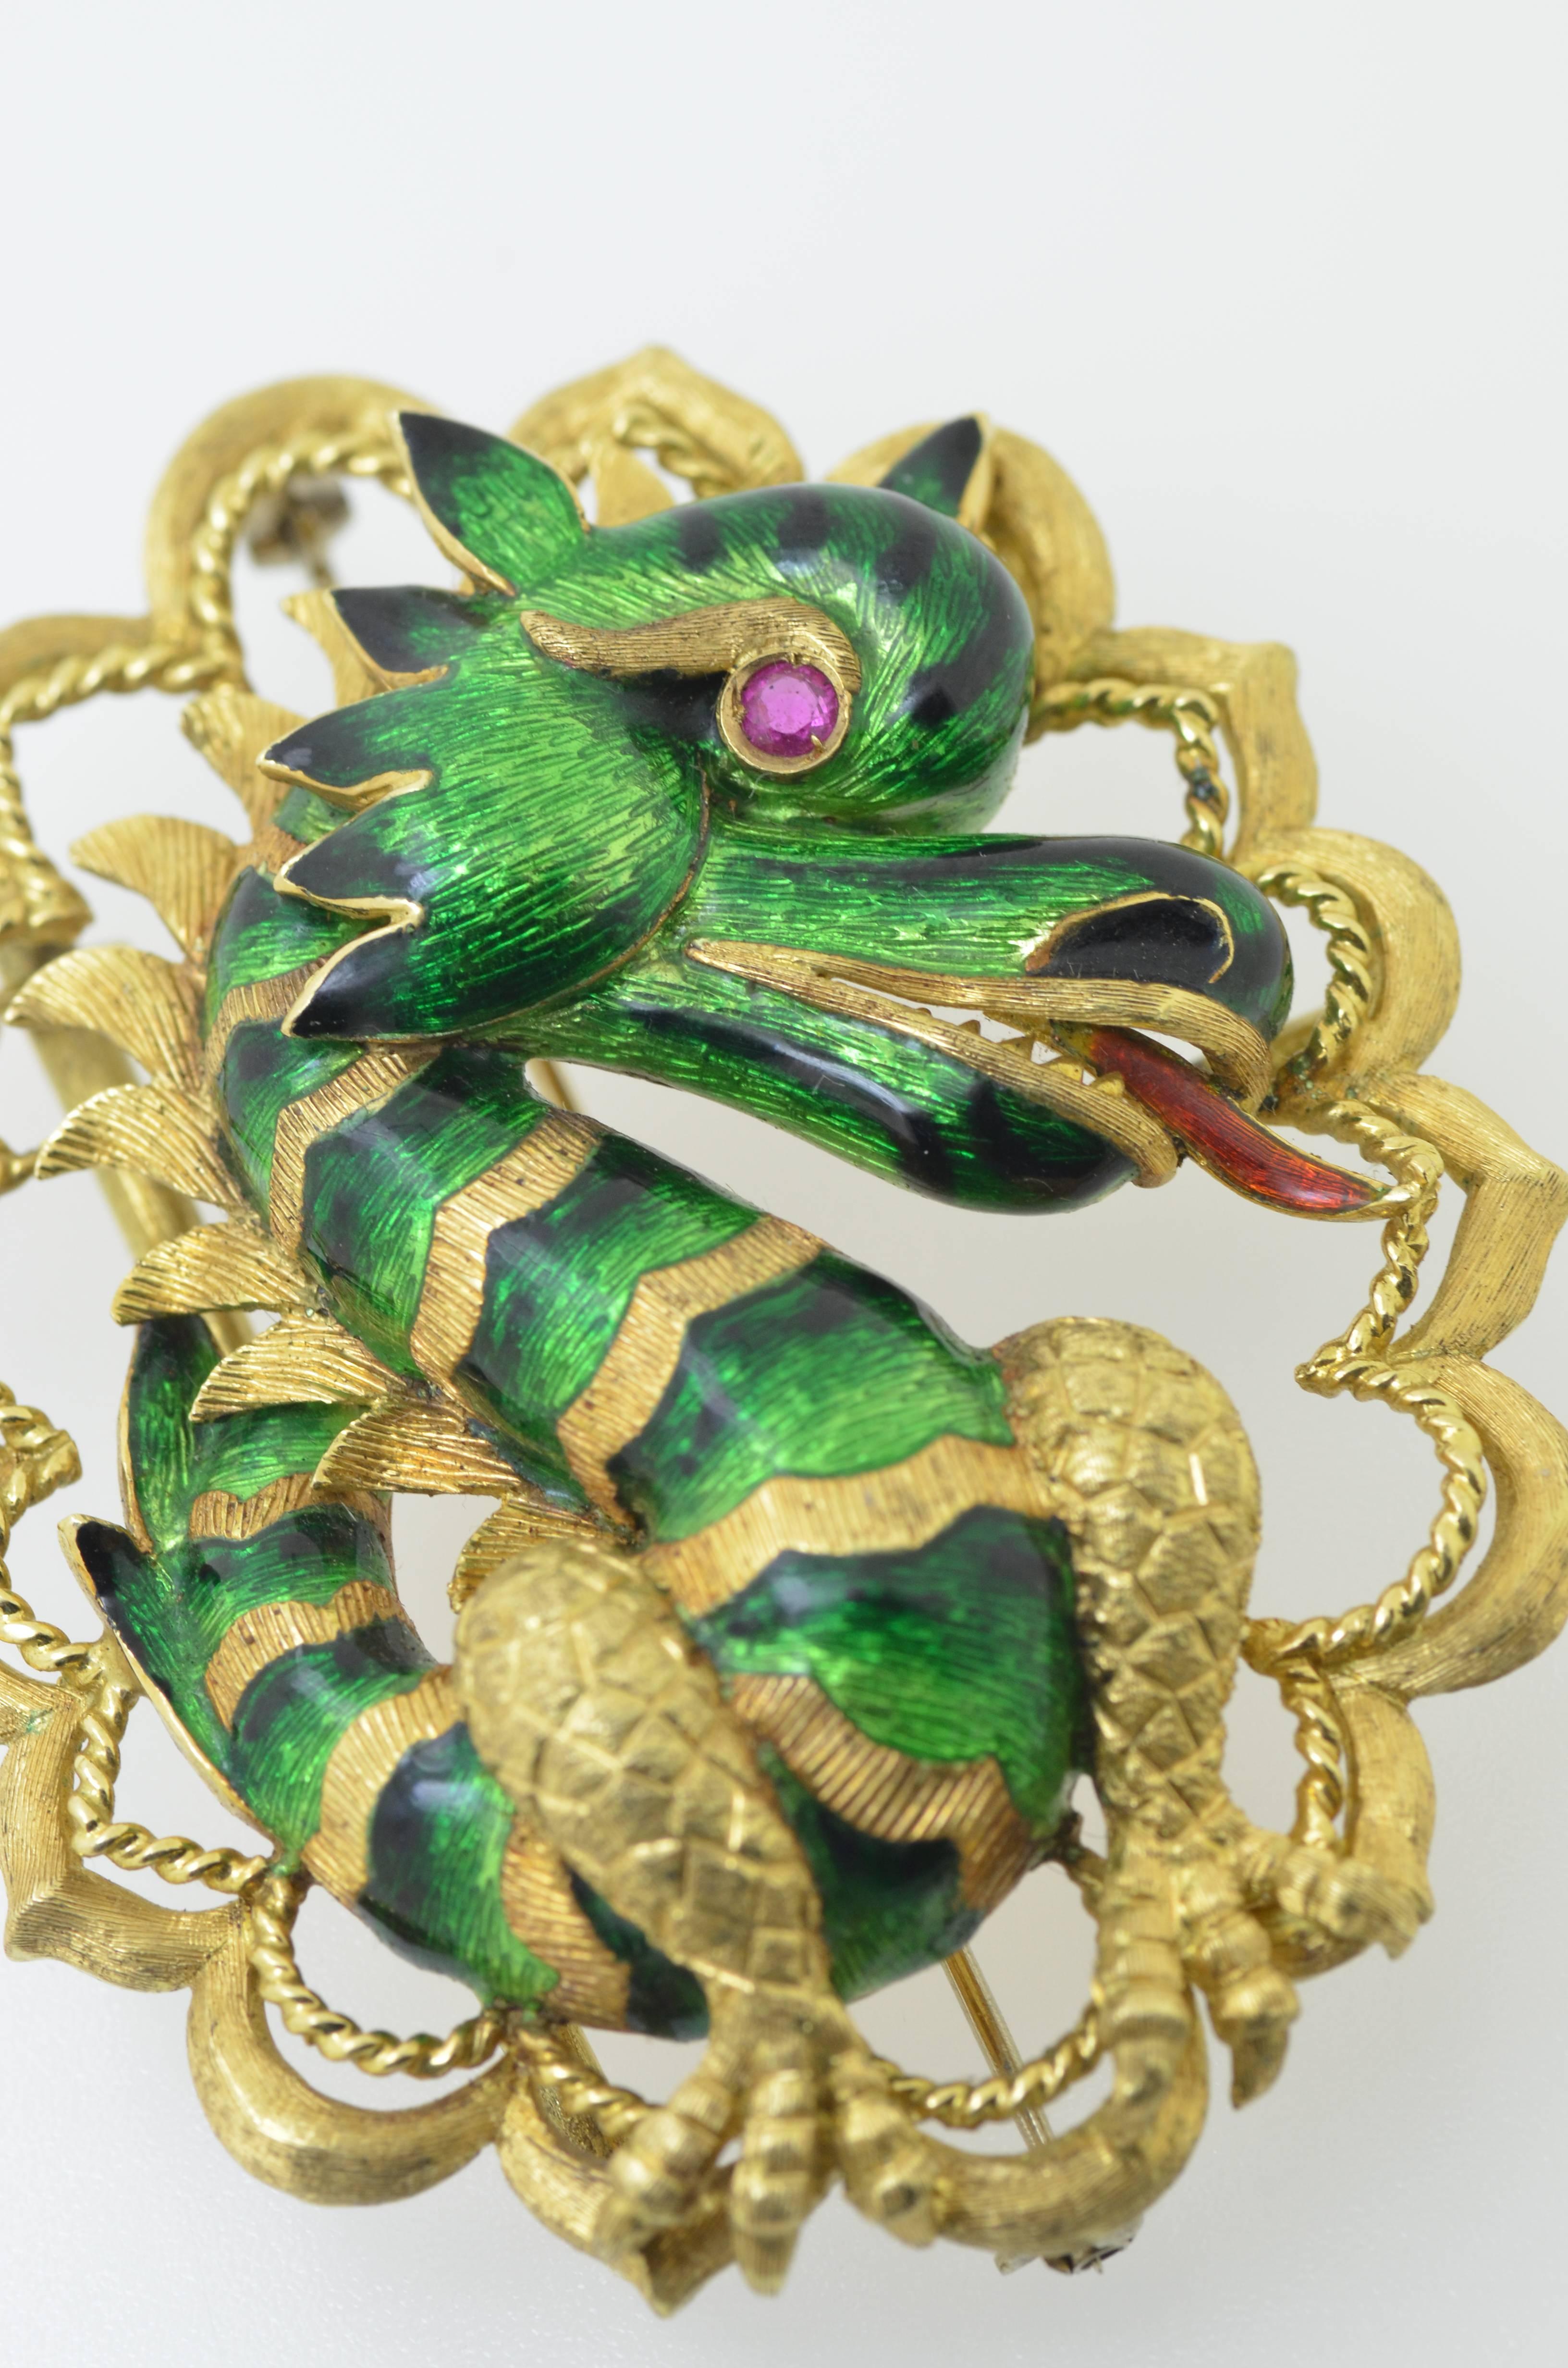 Large 18 karat yellow gold ruby and enamel dragon brooch with 18 karat yellow gold safet chain.